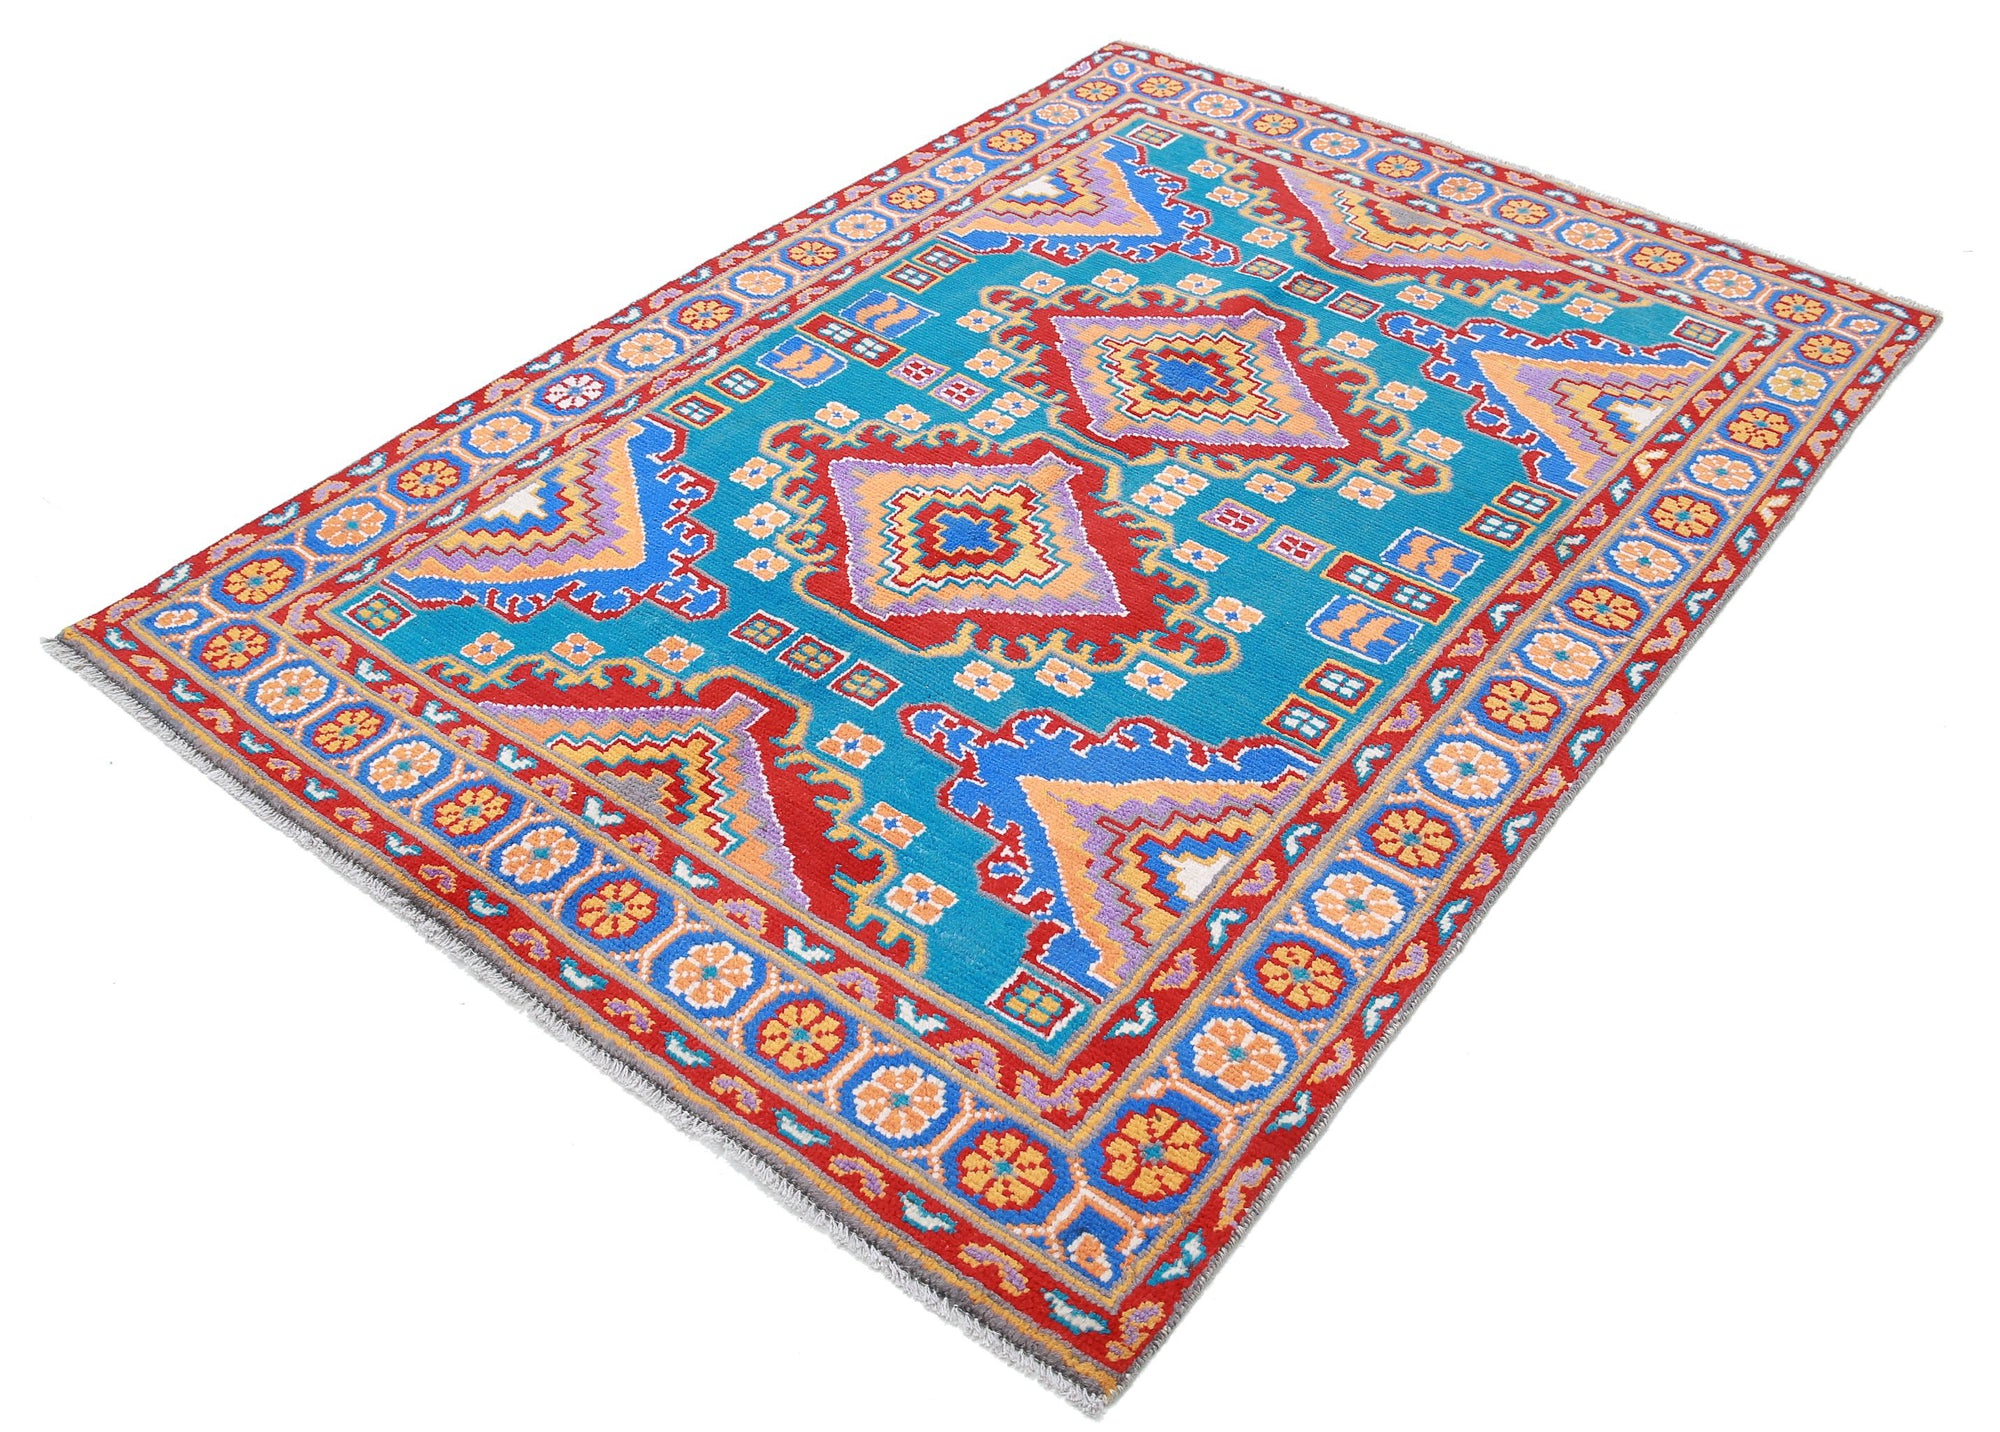 Revival-hand-knotted-qarghani-wool-rug-5014093-2.jpg